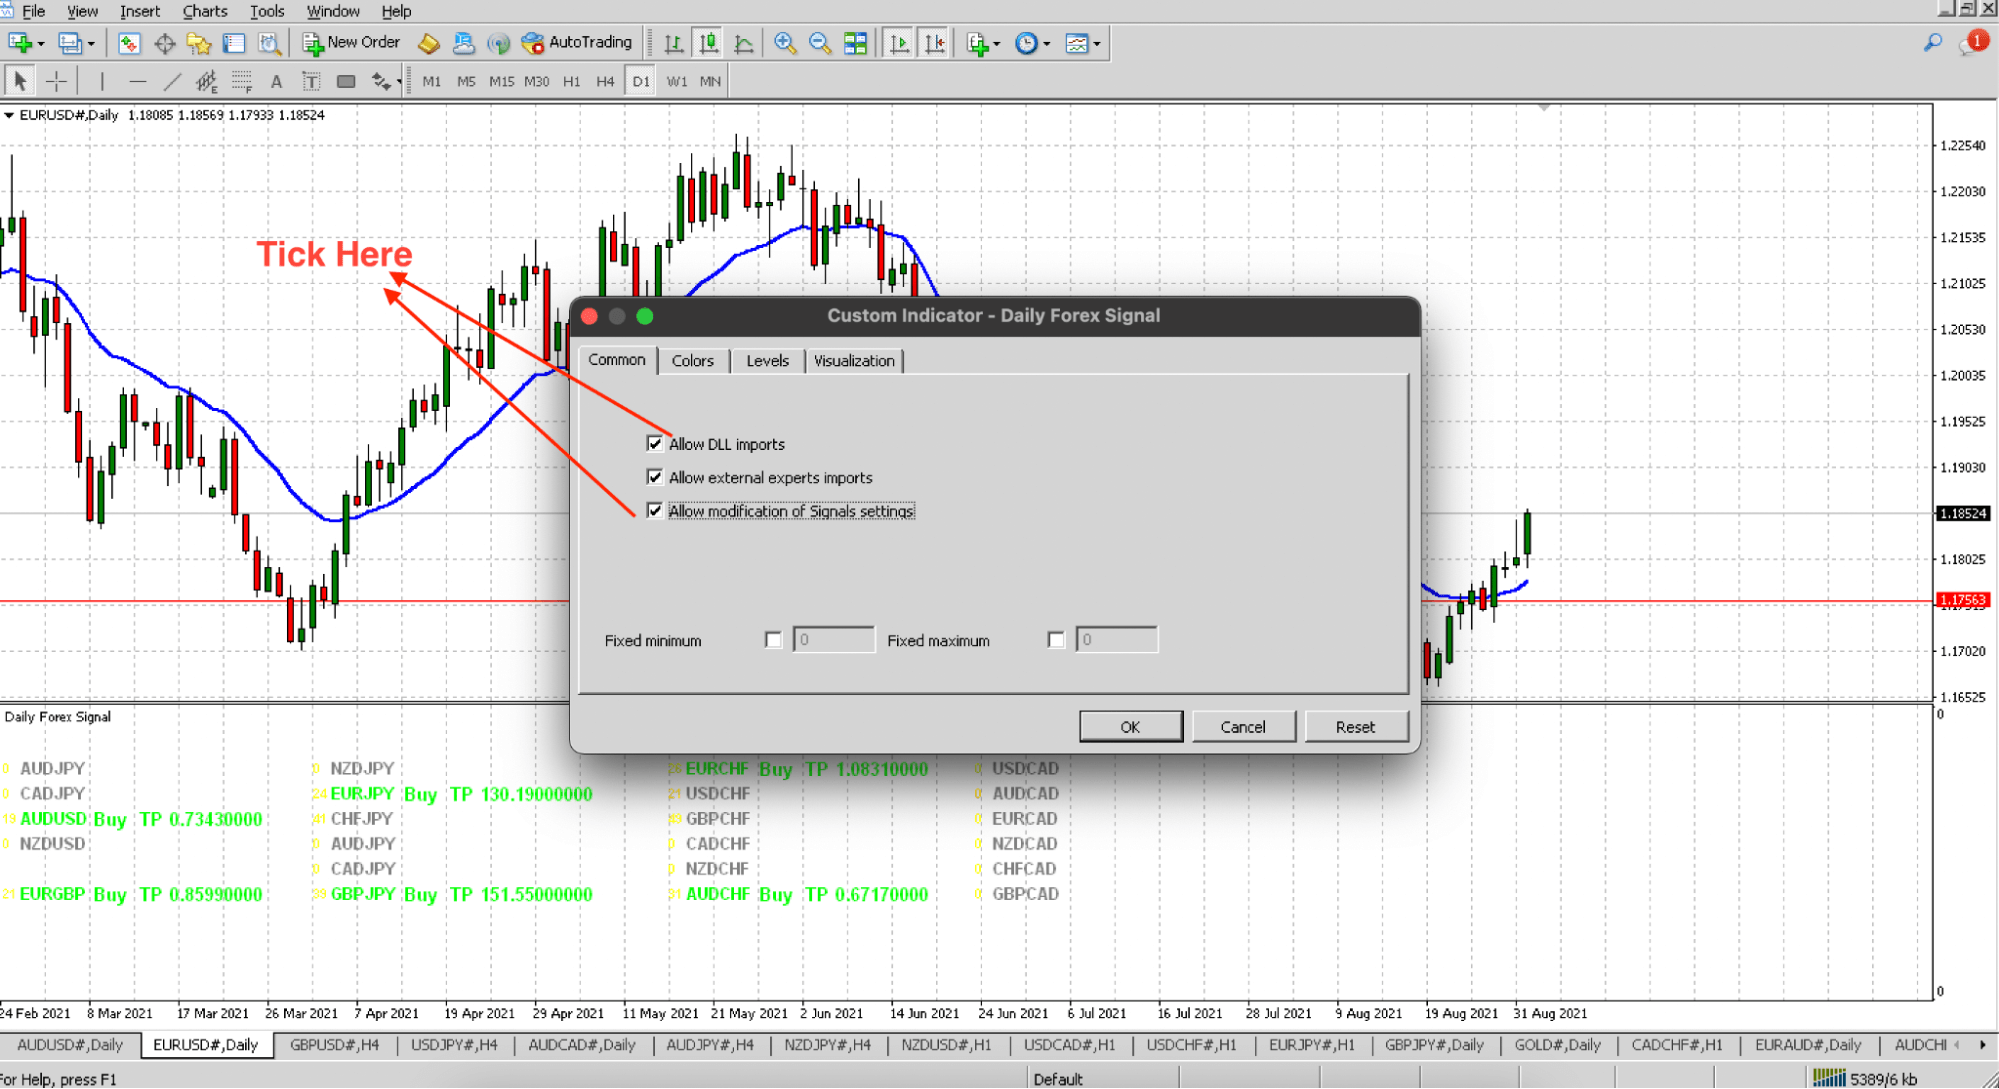 Daily forex signal setting